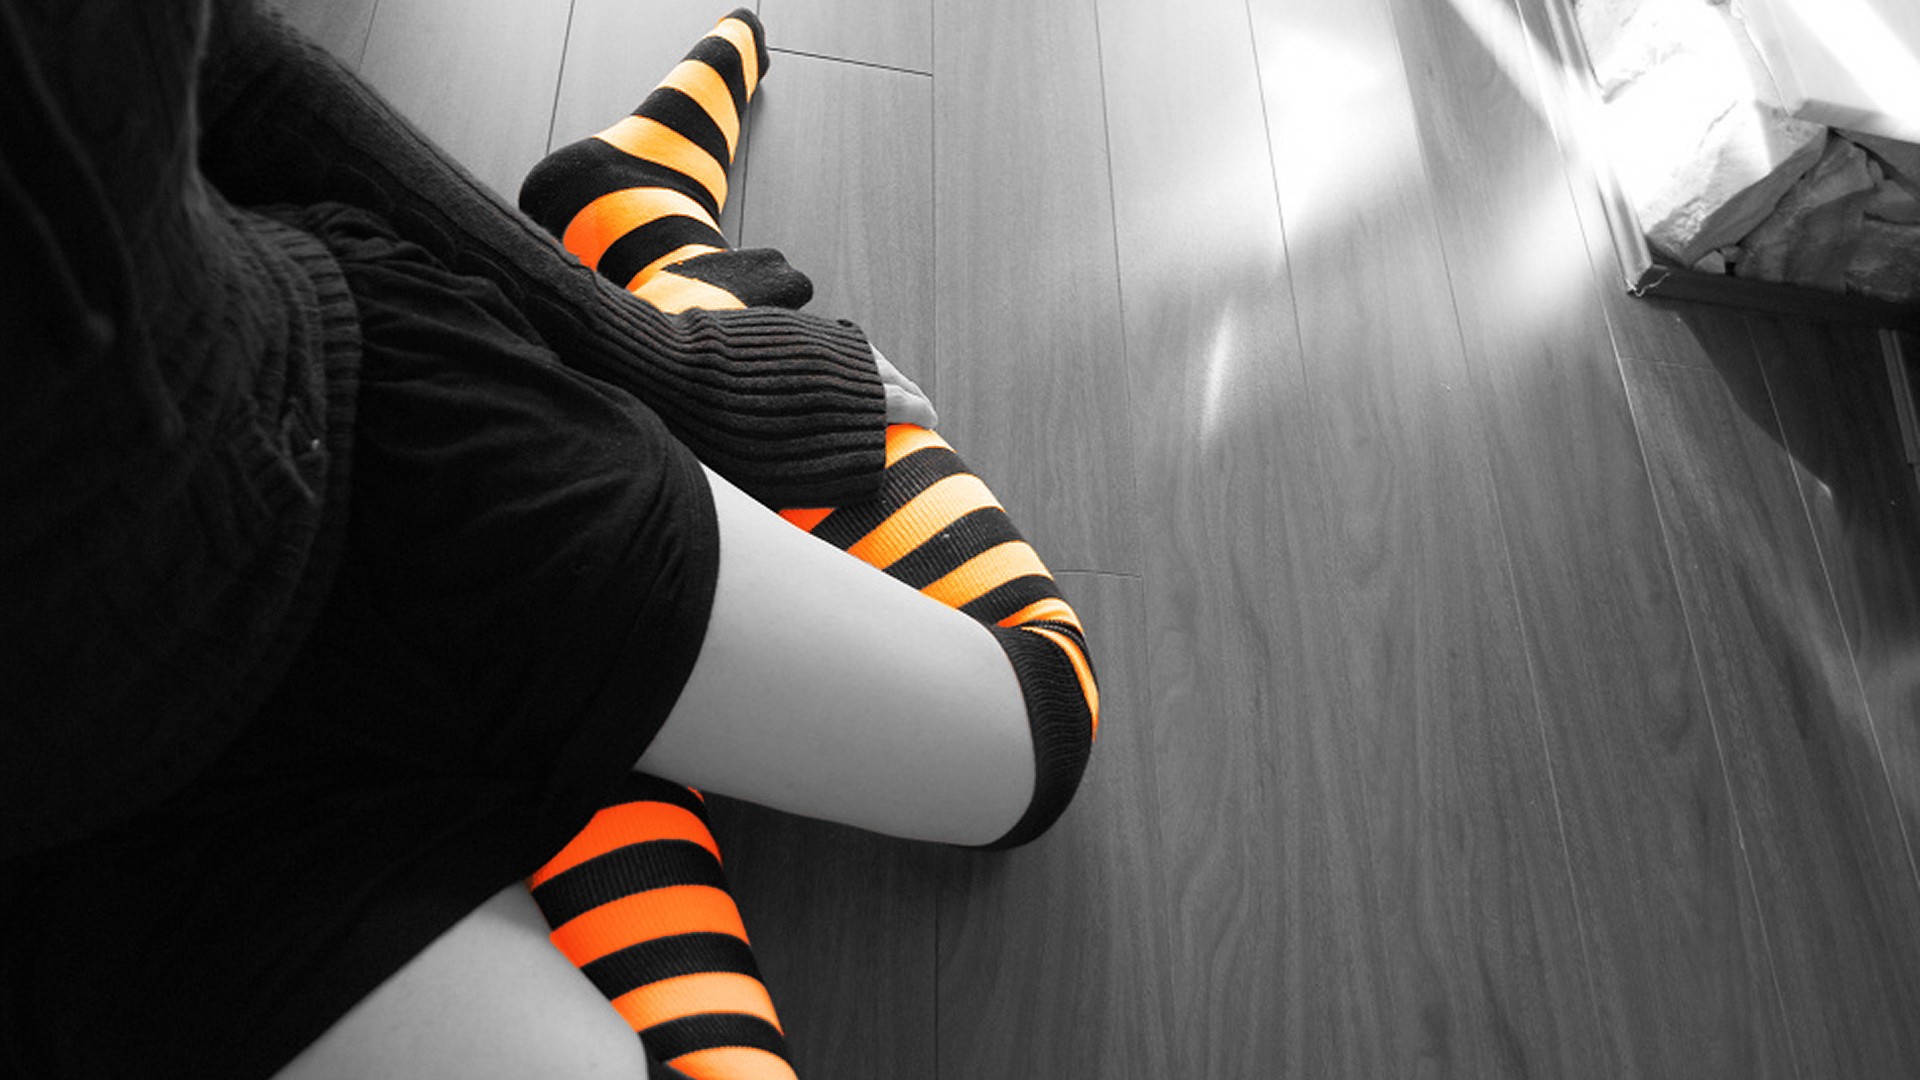 People 1920x1080 women stockings stripes legs selective coloring knee-highs on the floor women indoors wooden surface yellow black indoors